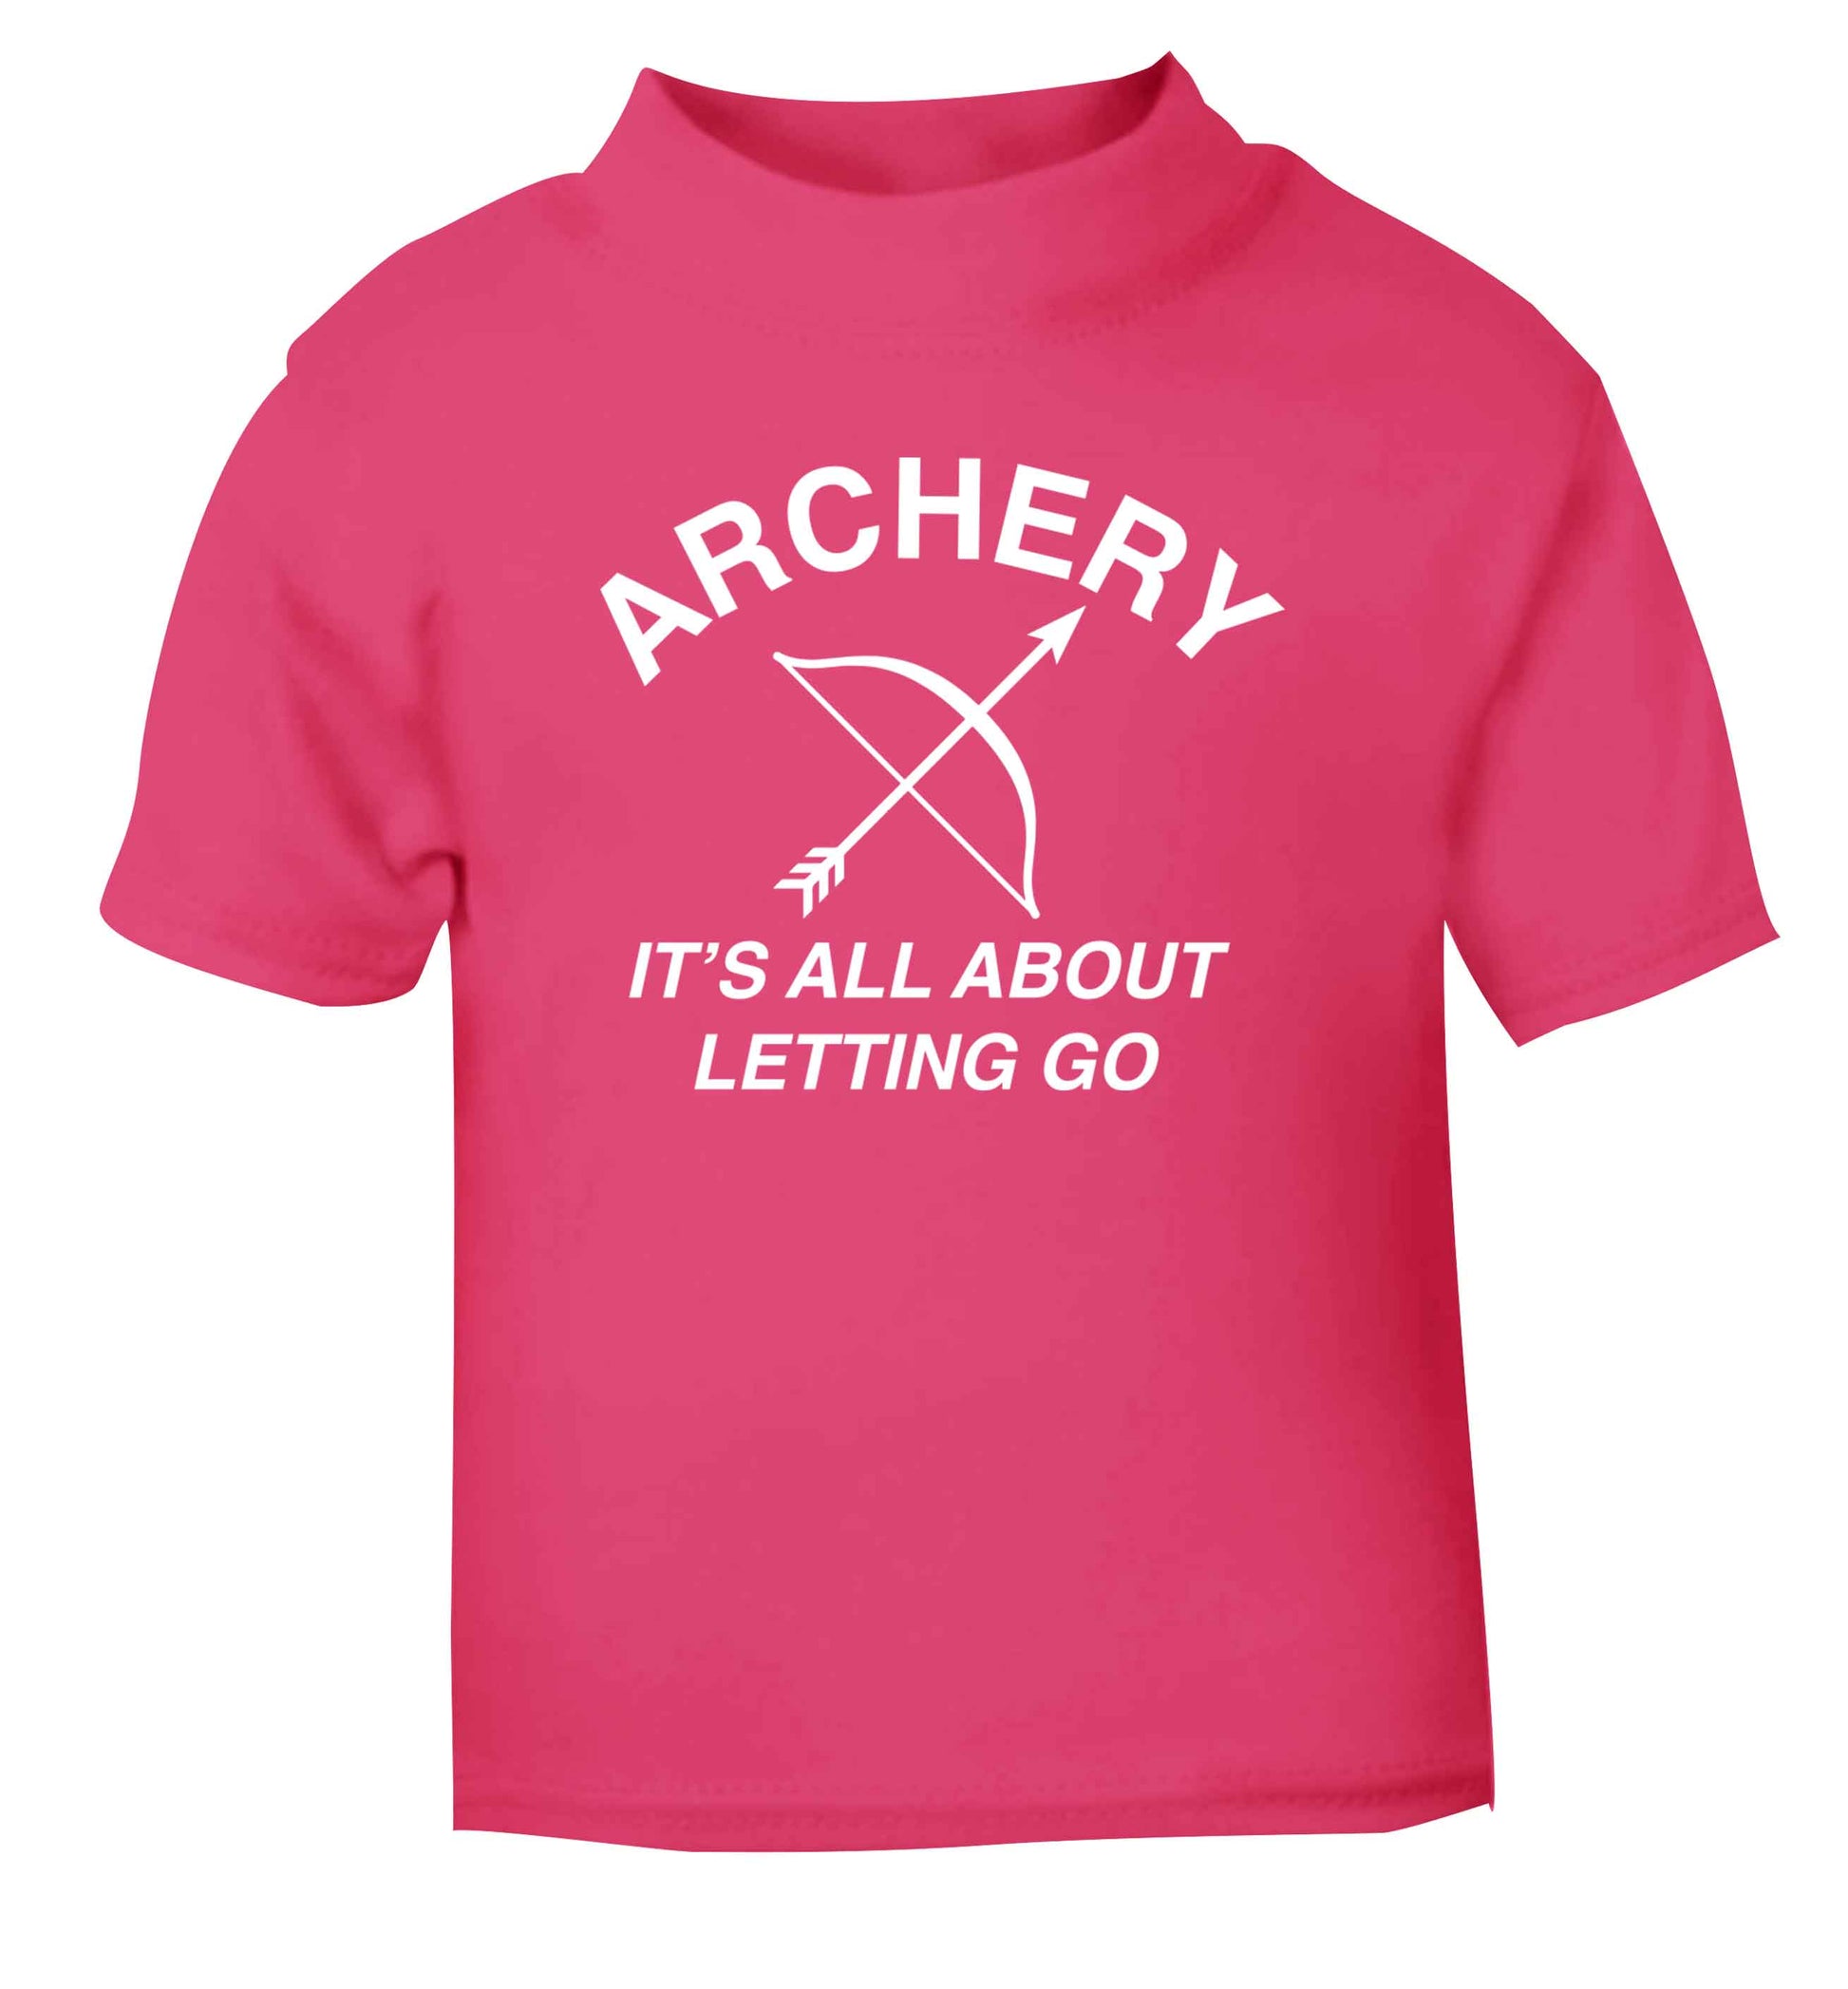 Archery it's all about letting go pink Baby Toddler Tshirt 2 Years